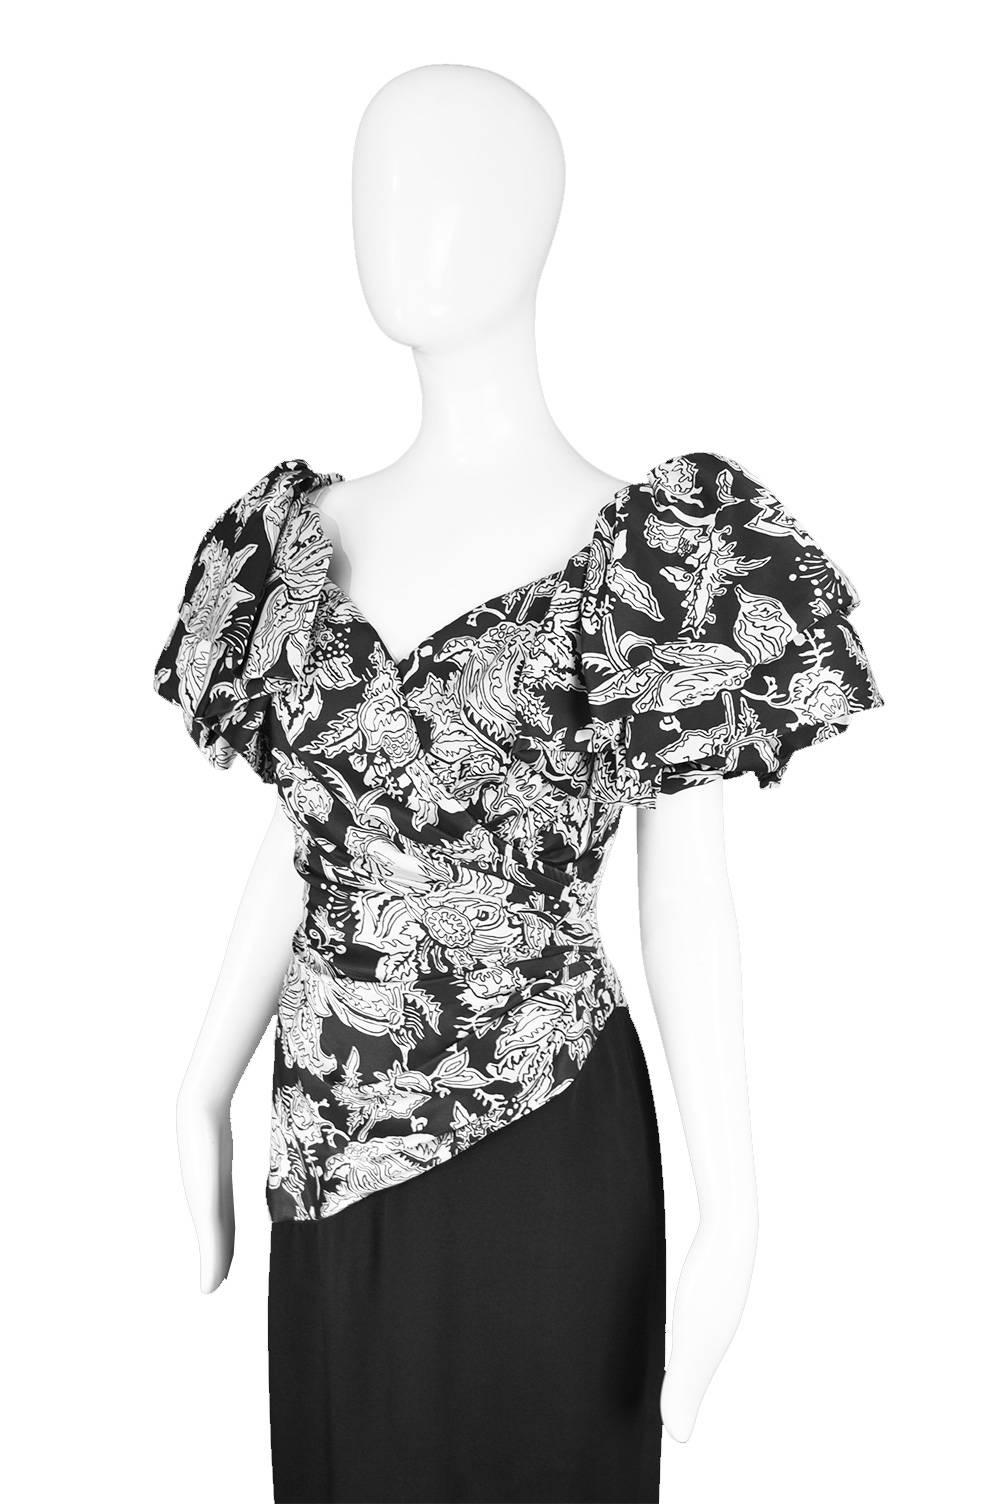 Mignon Vintage Black & White Floral Tiered Ruffle Sleeve Evening Gown, 1980s In Good Condition For Sale In Doncaster, South Yorkshire